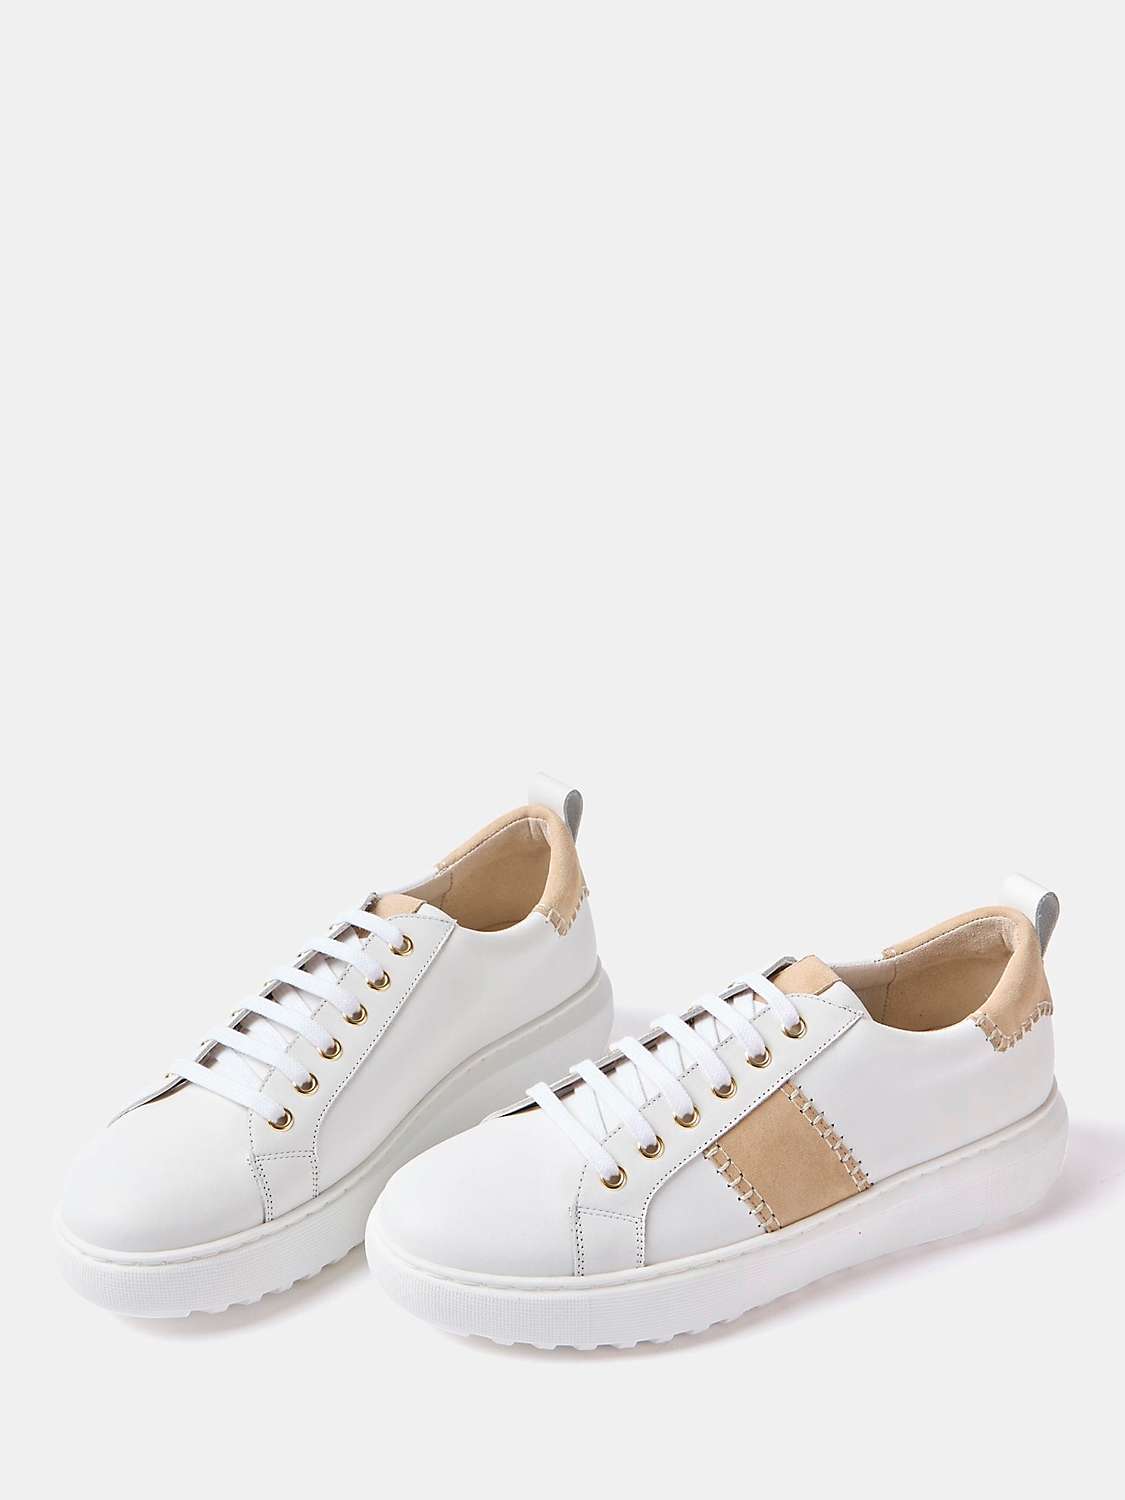 Buy Mint Velvet Suede Patchwork Panel Leather Trainers, White/Neutral Online at johnlewis.com